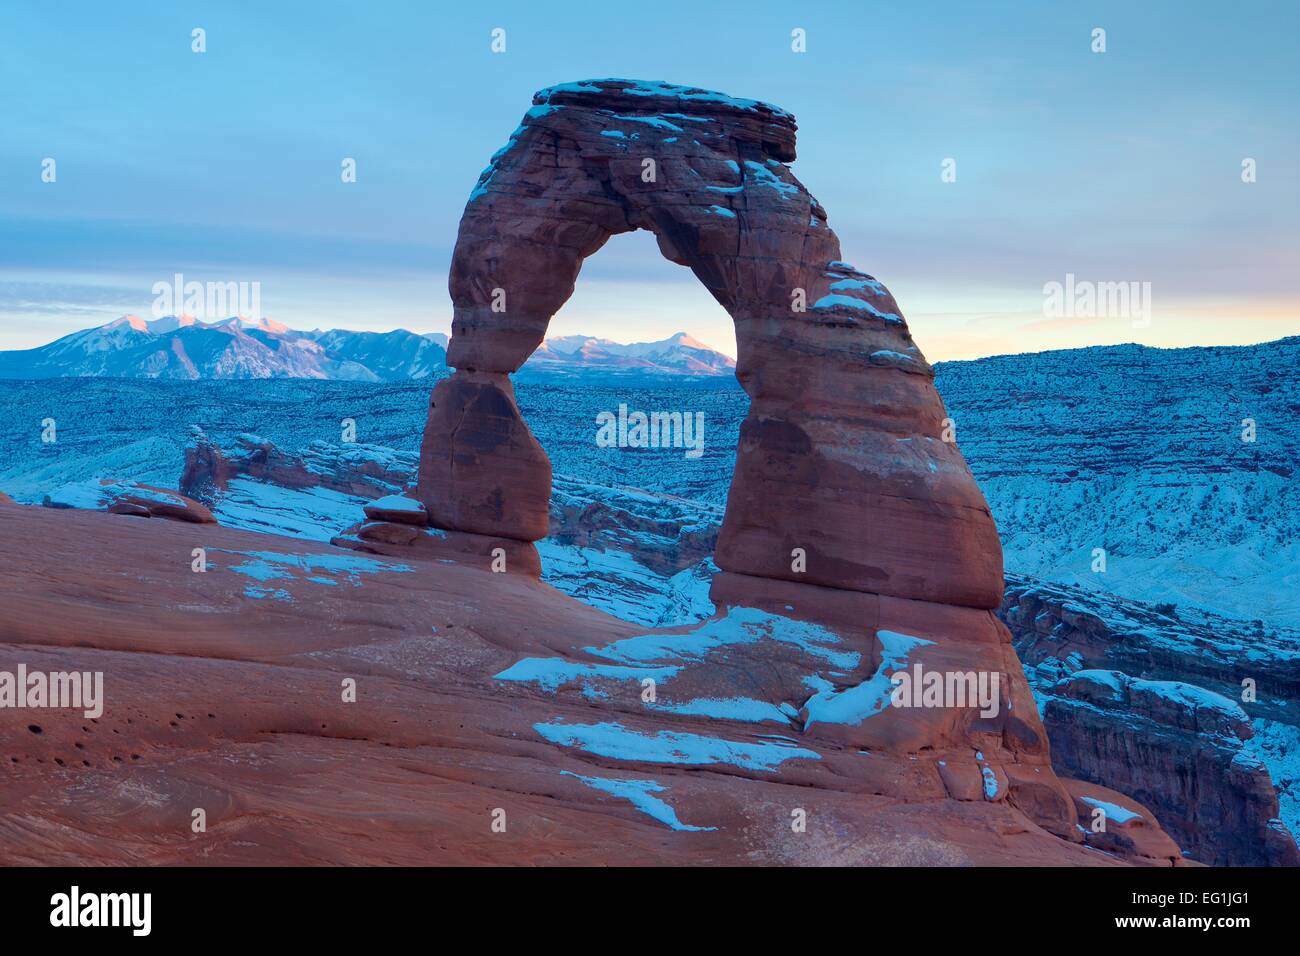 Famous Delicate Arch in Arches National Park near Moab, Utah in winter with snow. Stock Photo